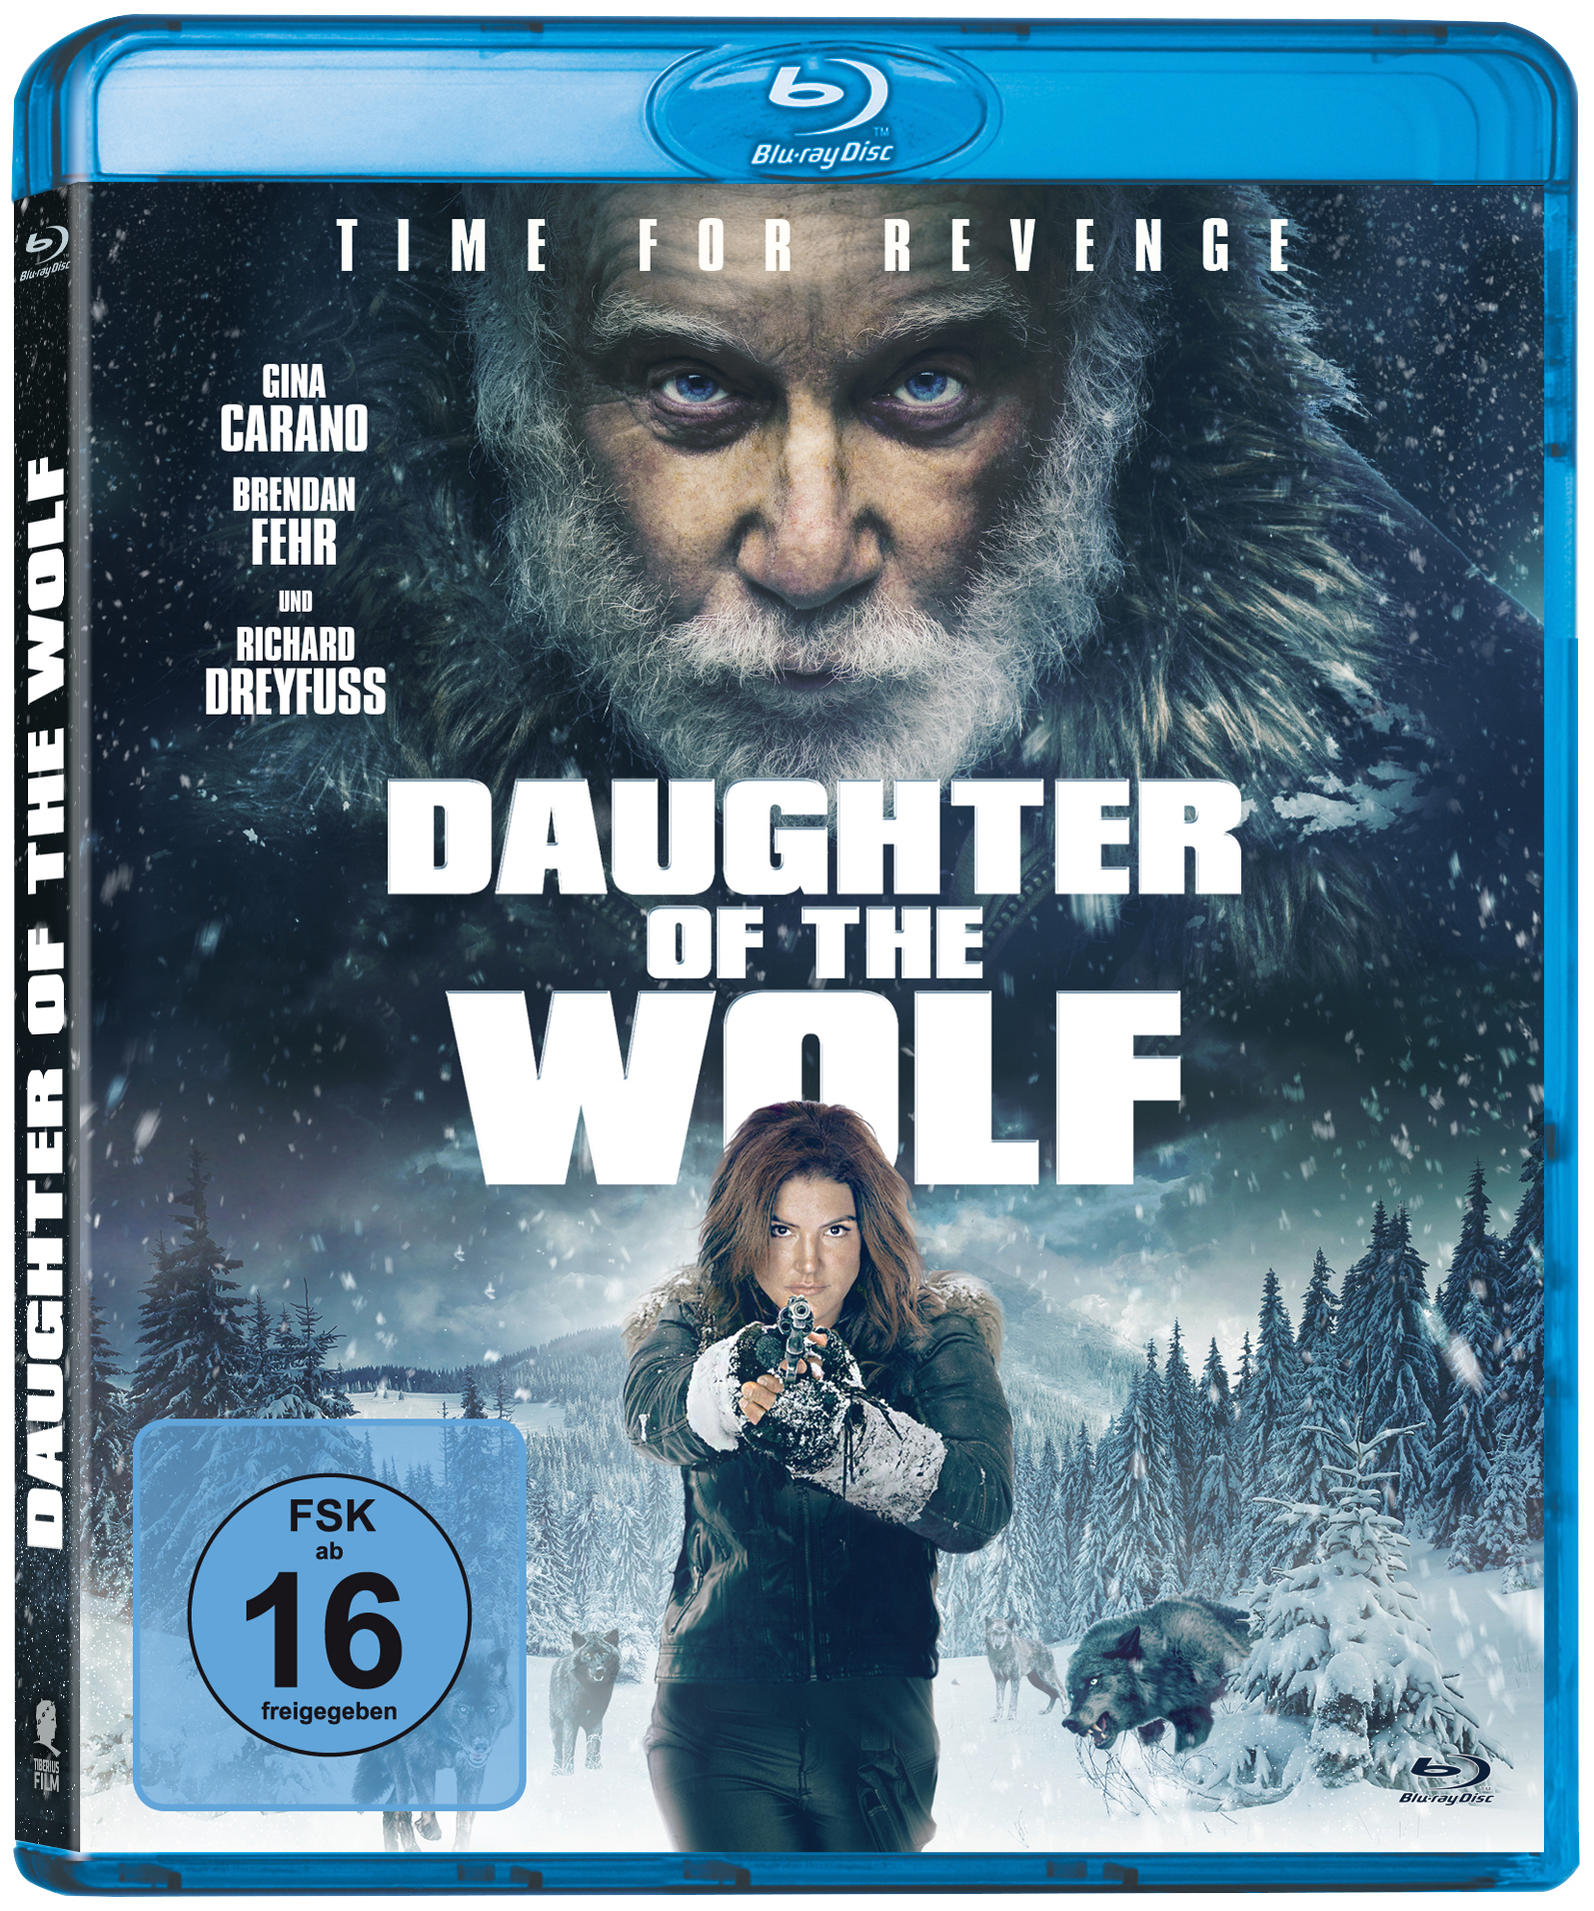 Daughter of the Blu-ray Wolf